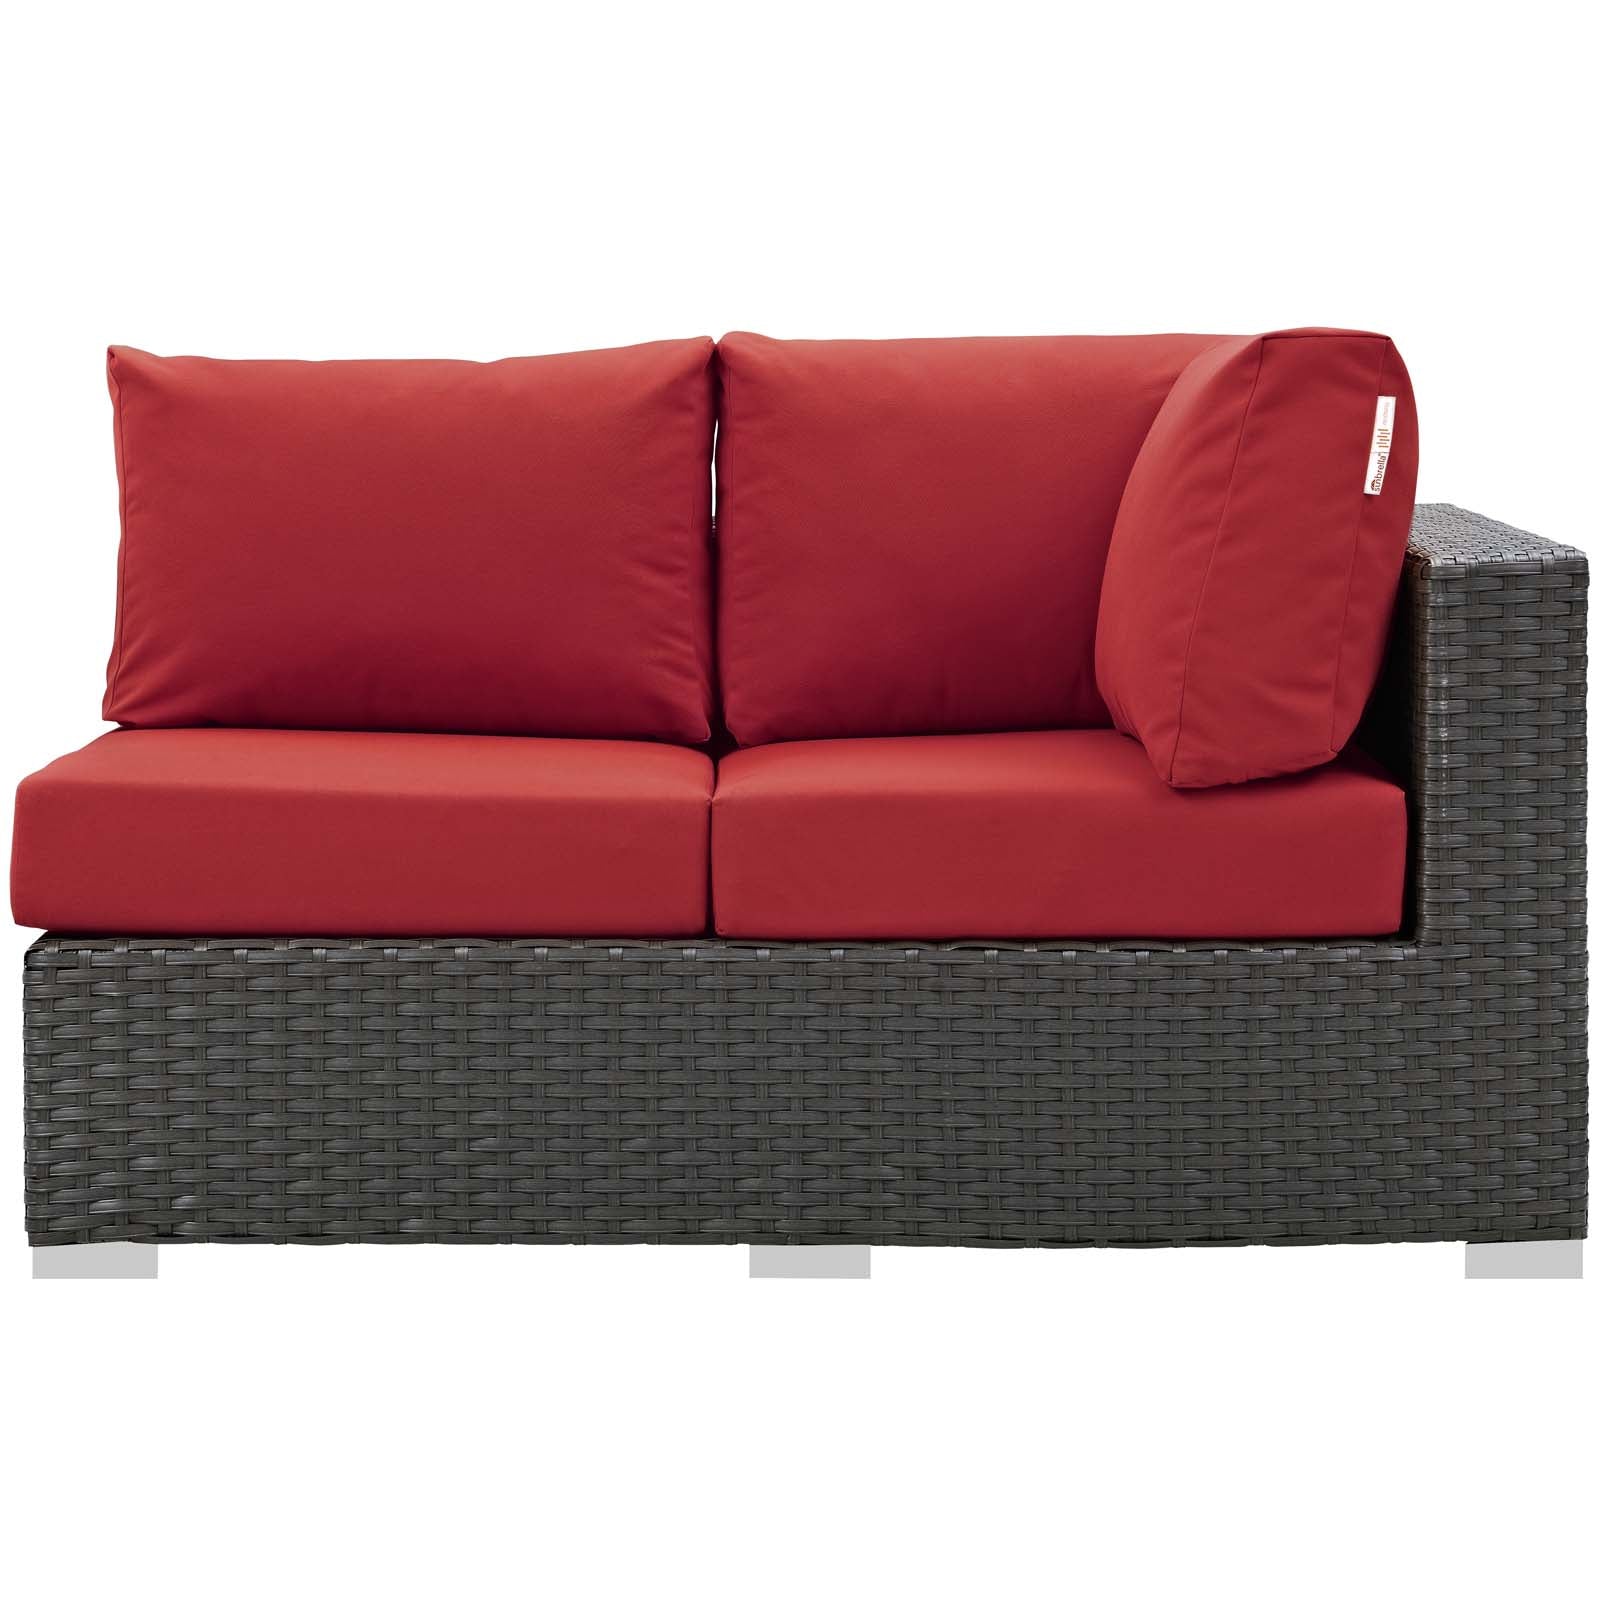 Modway Outdoor Sofas - Sojourn Outdoor Patio Sunbrella Right Arm Loveseat Canvas Red